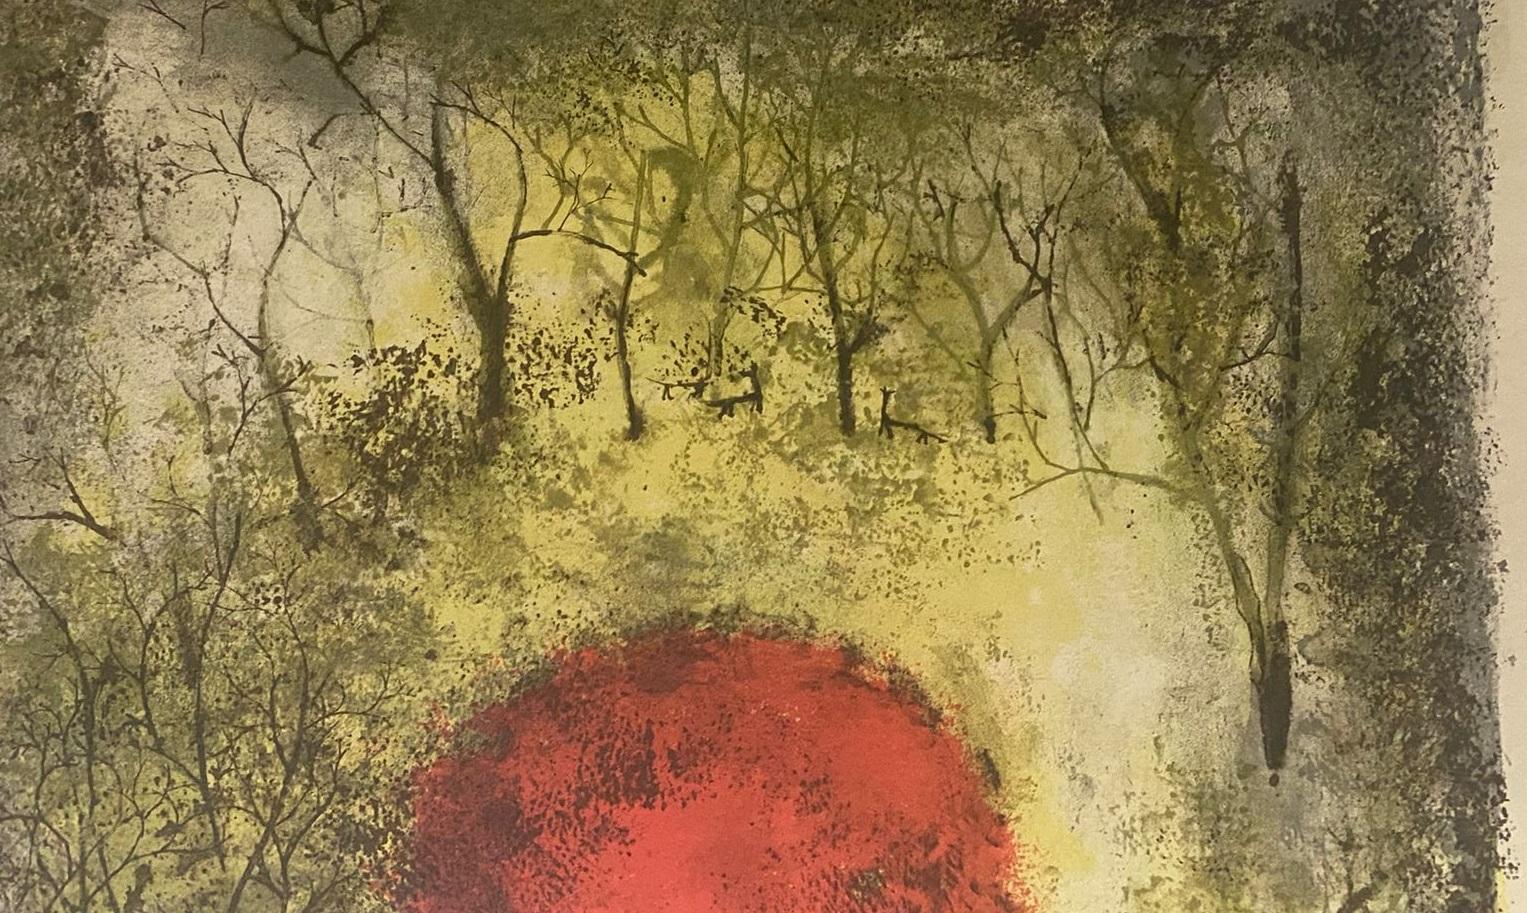 Le Soleil Rouge, color Lithograph on Arches paper
1950 by Zao Wou-ki
Printed by E. and J. Desjobert Paris
signed and numbered
image 48 x 34 cm; sheet 56 x 38 cm
image 18 ⁵⁷/₆₄ x 13 ²⁵/₆₄cm; sheet 22 ³/₆₄ x 14 ⁶¹/₆₄ cm
Edition 48/200
Another copy of